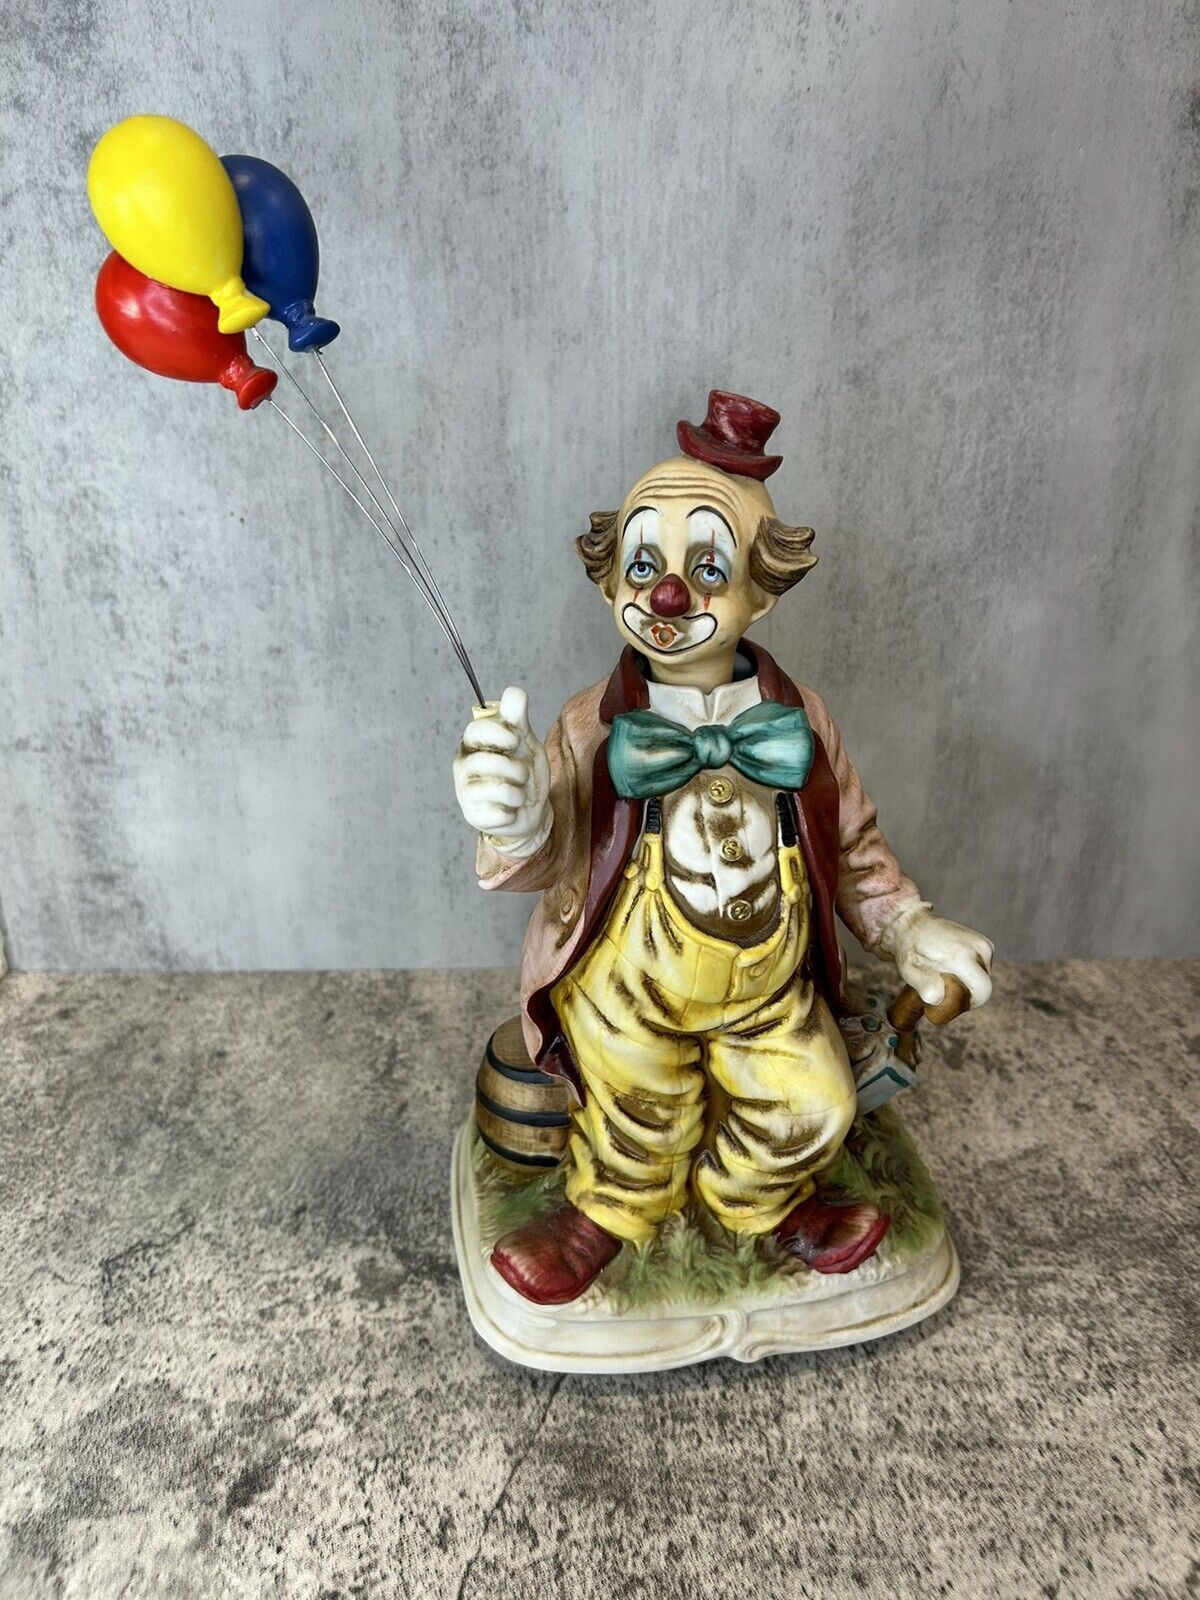 Vintage Whistling Balloon Clown Melody In Motion Waco Ceramic Figurine WORKS